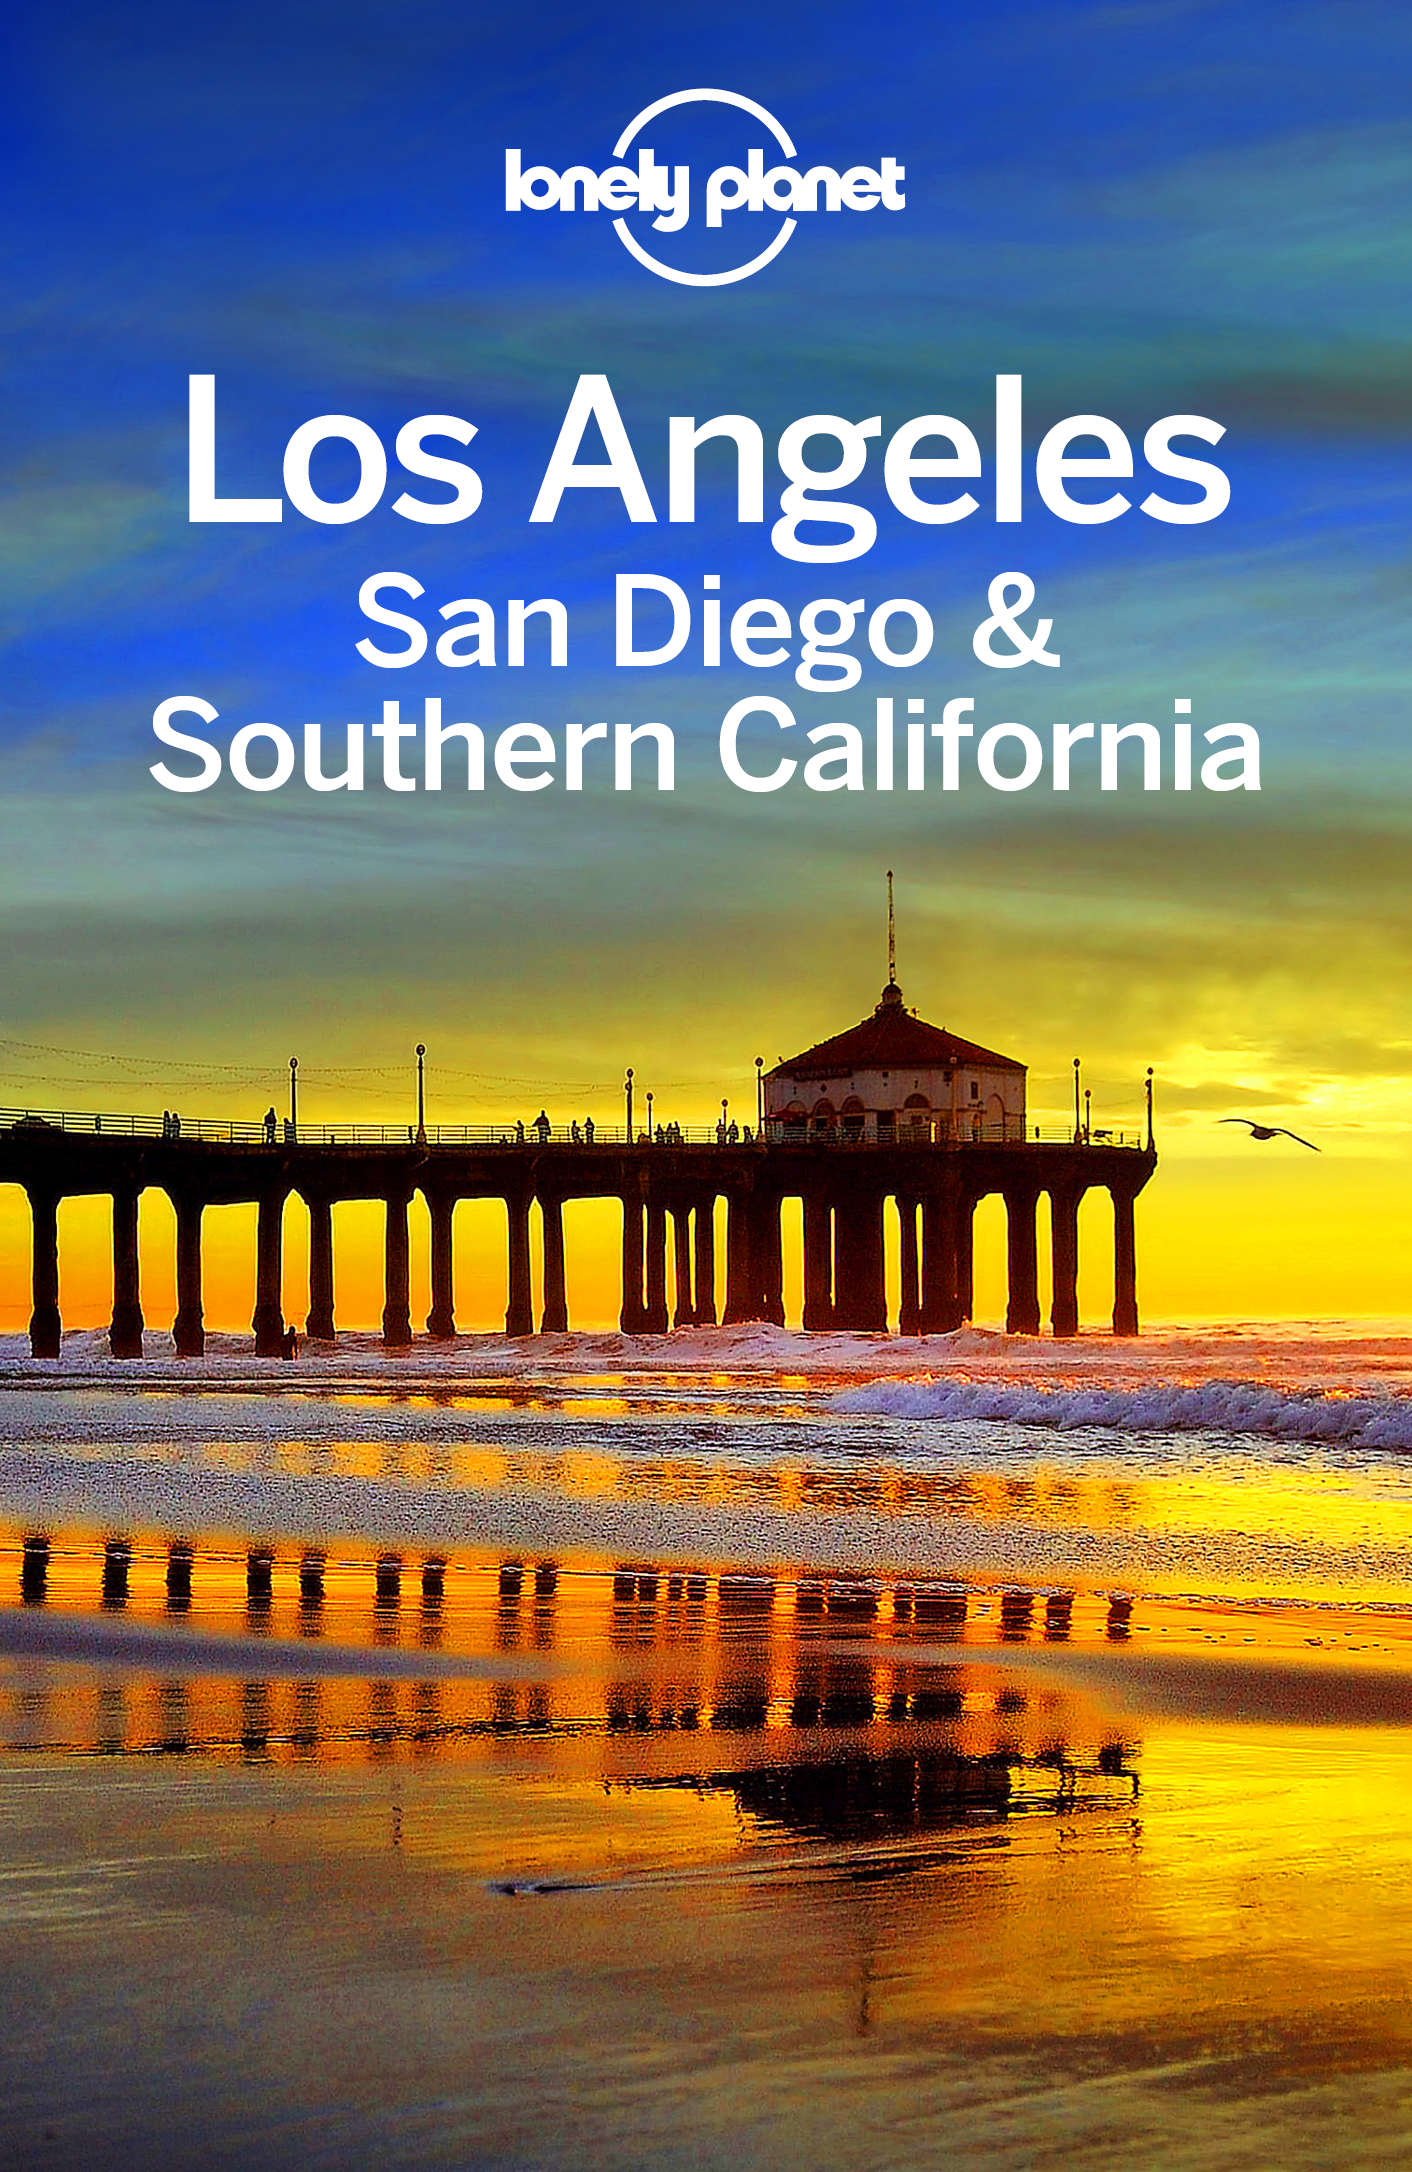 Lonely Planet Los Angeles San Diego Southern California - image 1